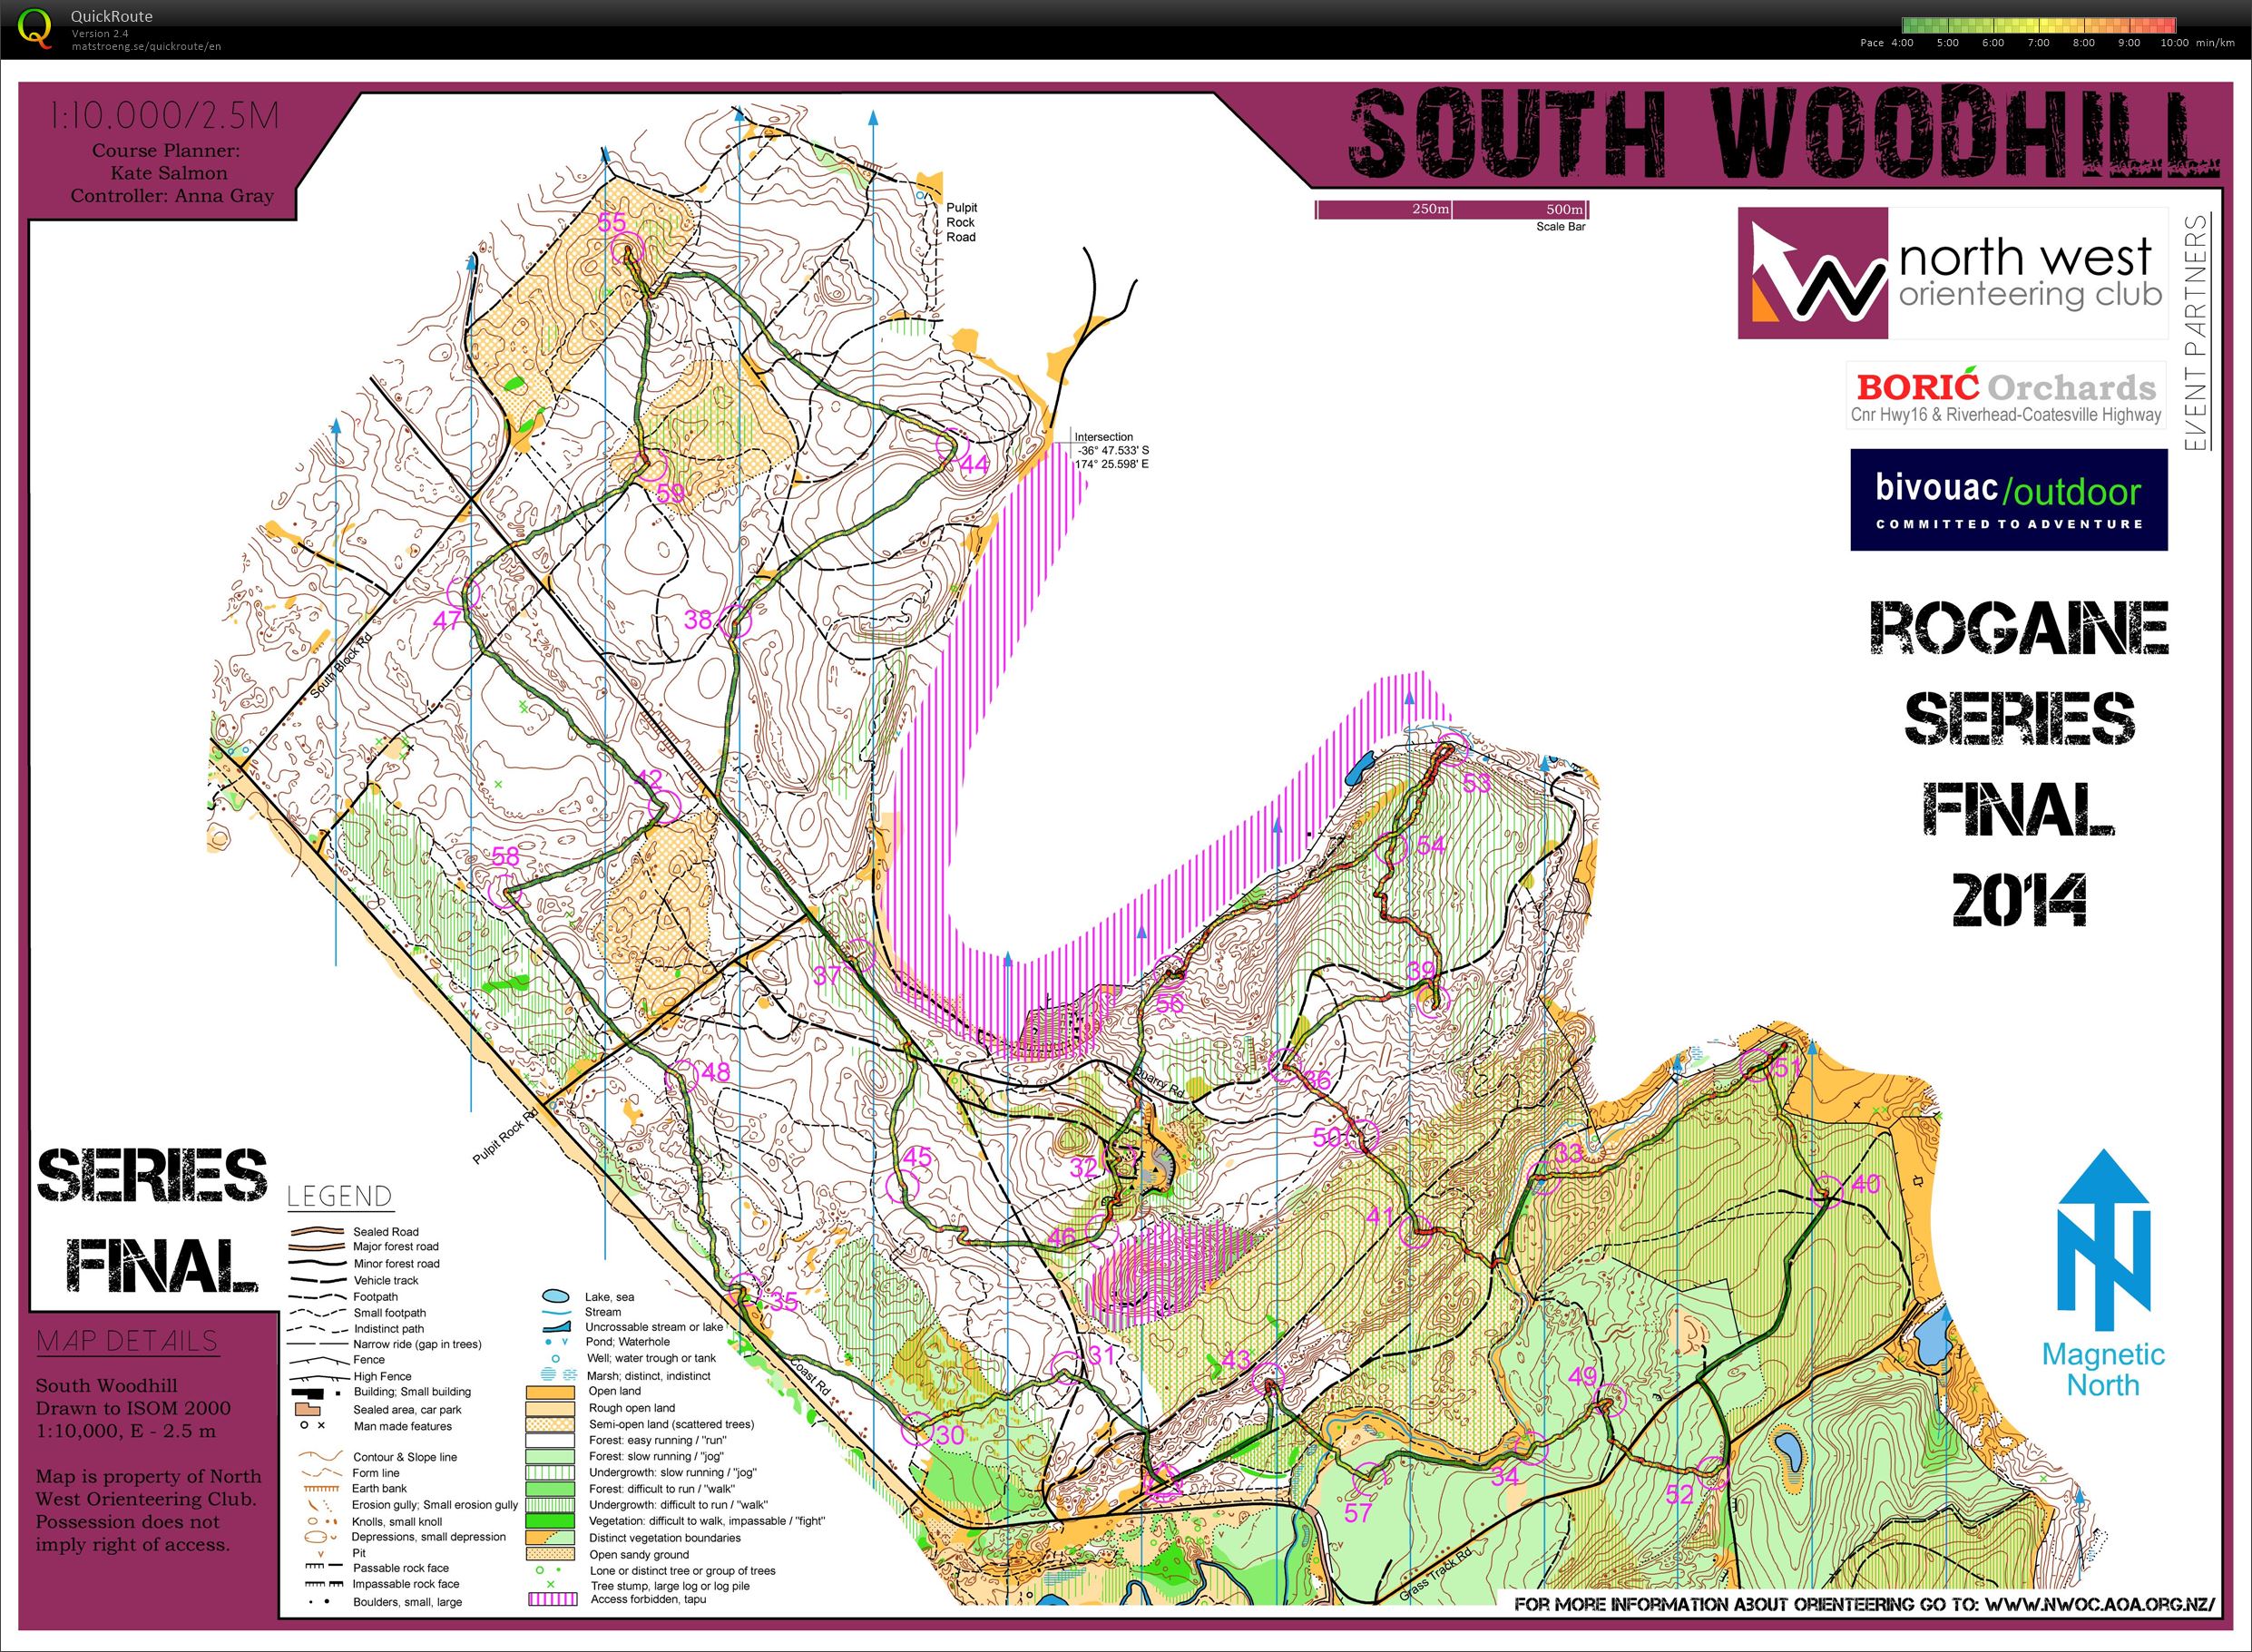 Rogaine Series - Part 4 - South Woodhill (2014-06-08)